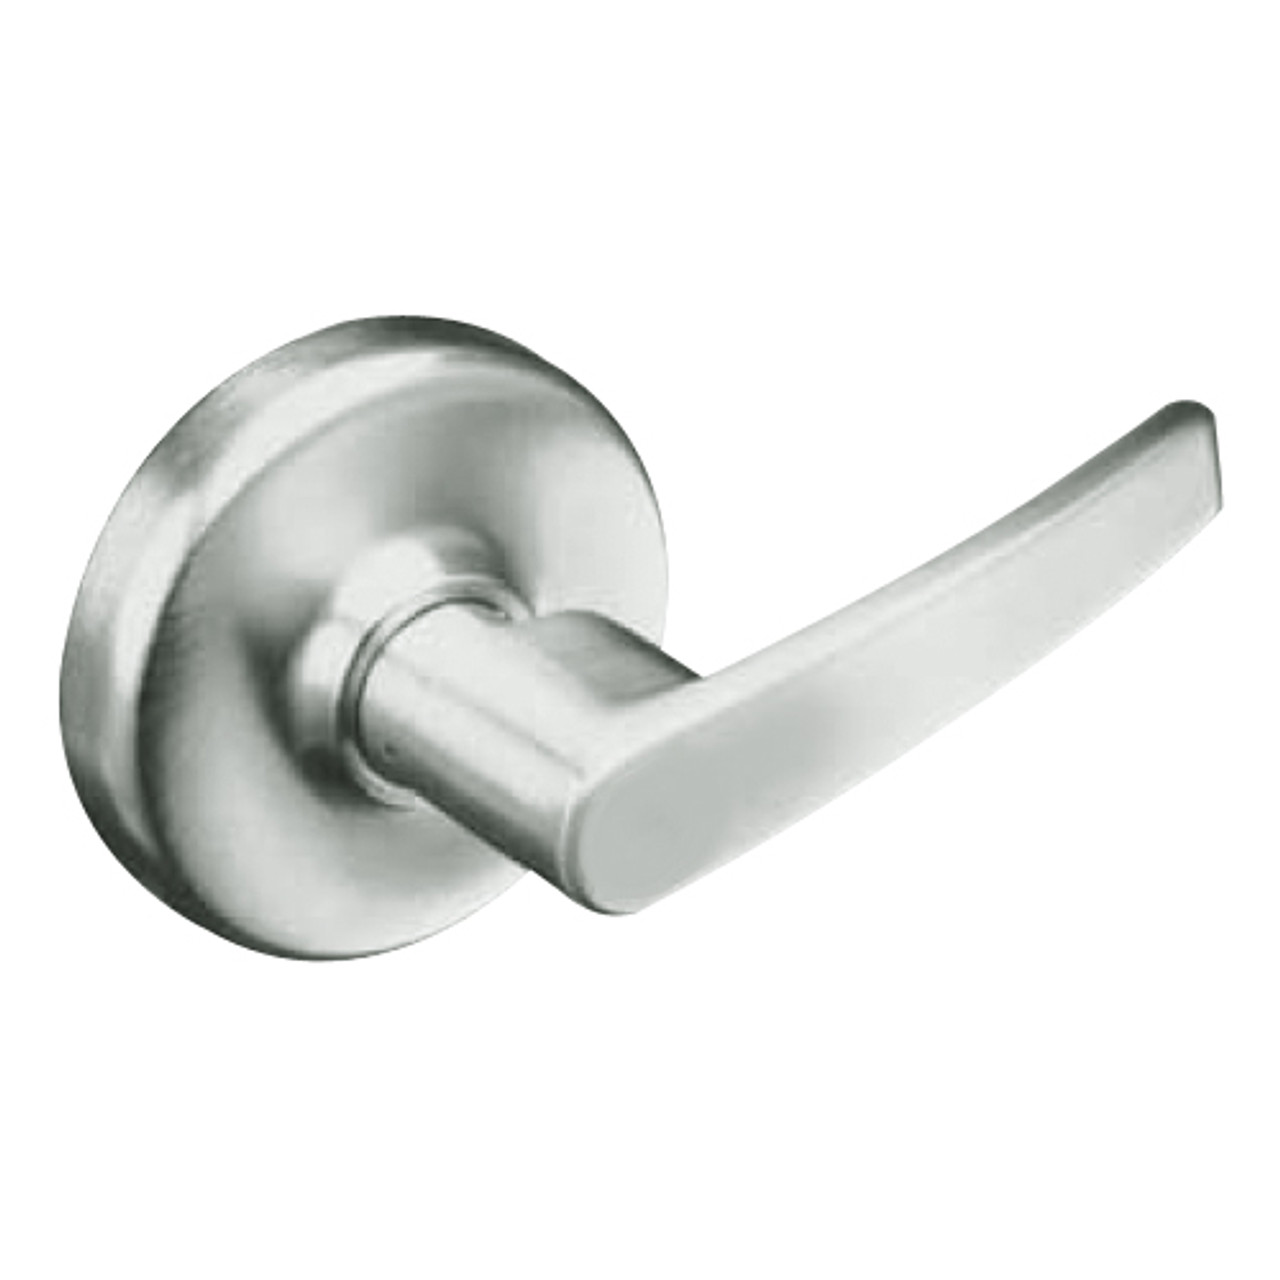 CL3150-AZD-618 Corbin CL3100 Series Vandal Resistant Half Dummy Cylindrical Locksets with Armstrong Lever in Bright Nickel Plated Finish